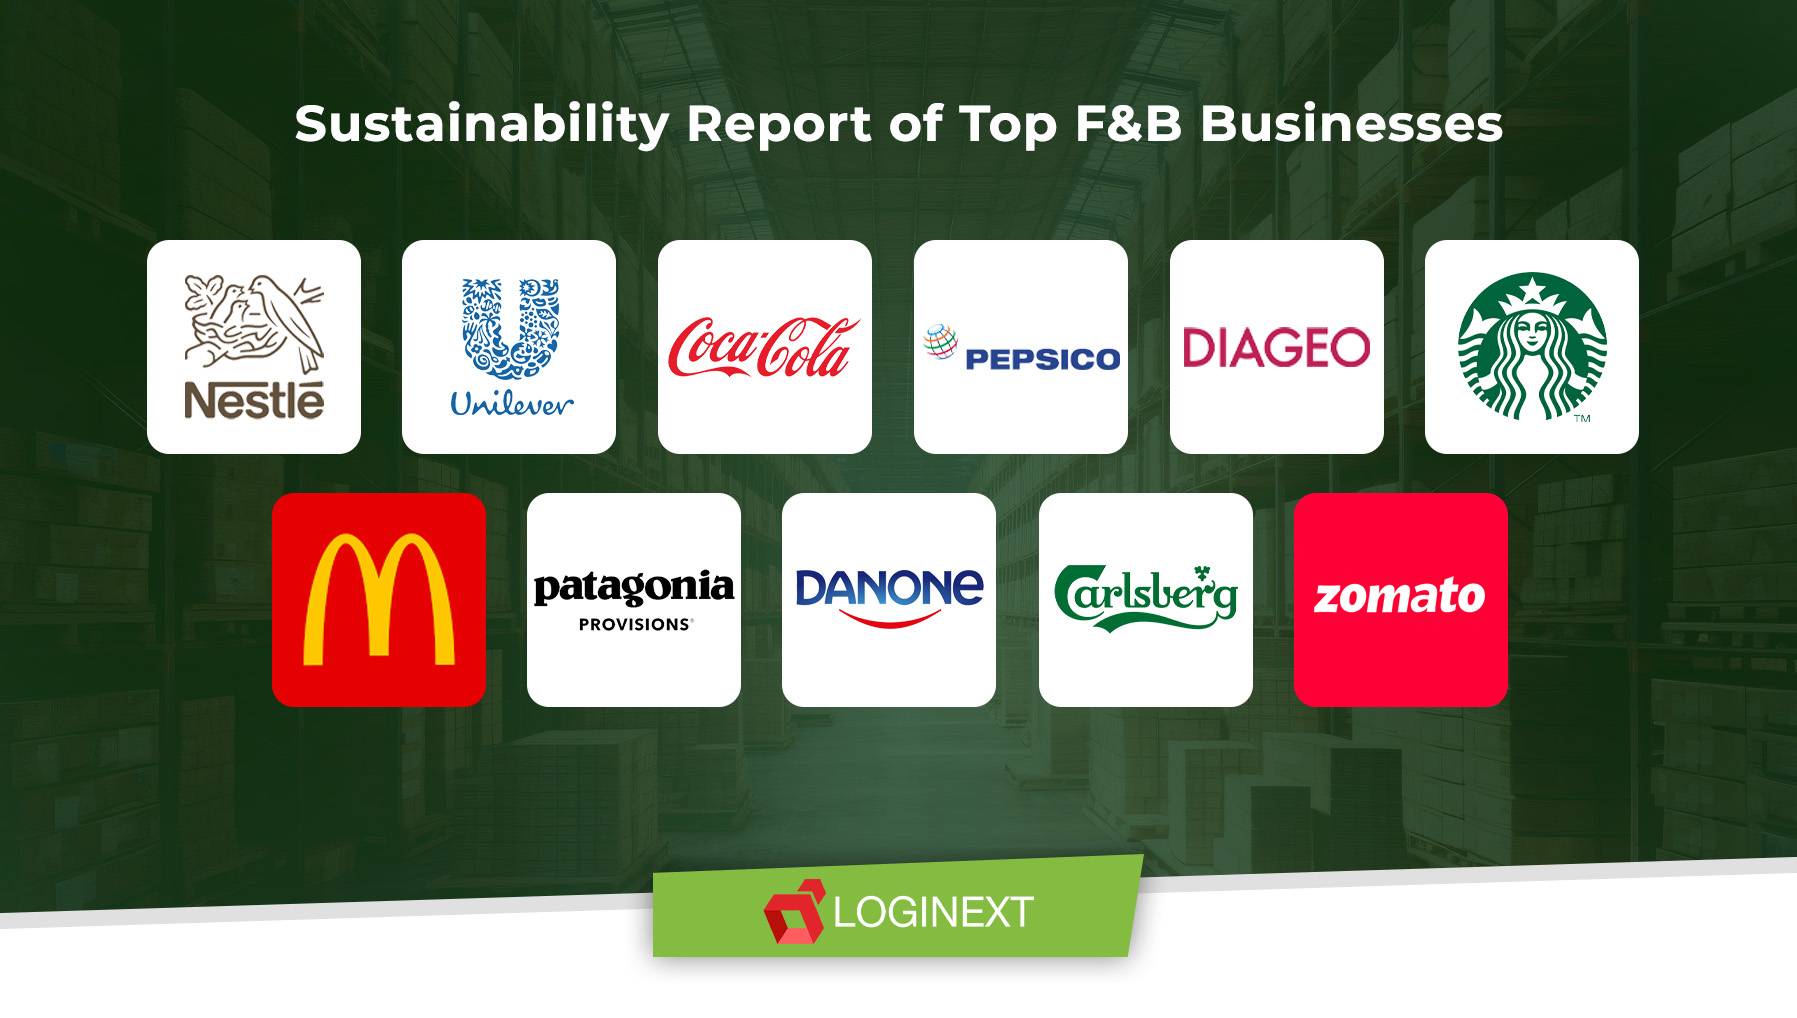 Sustainability in top brands in the food and beverage industry